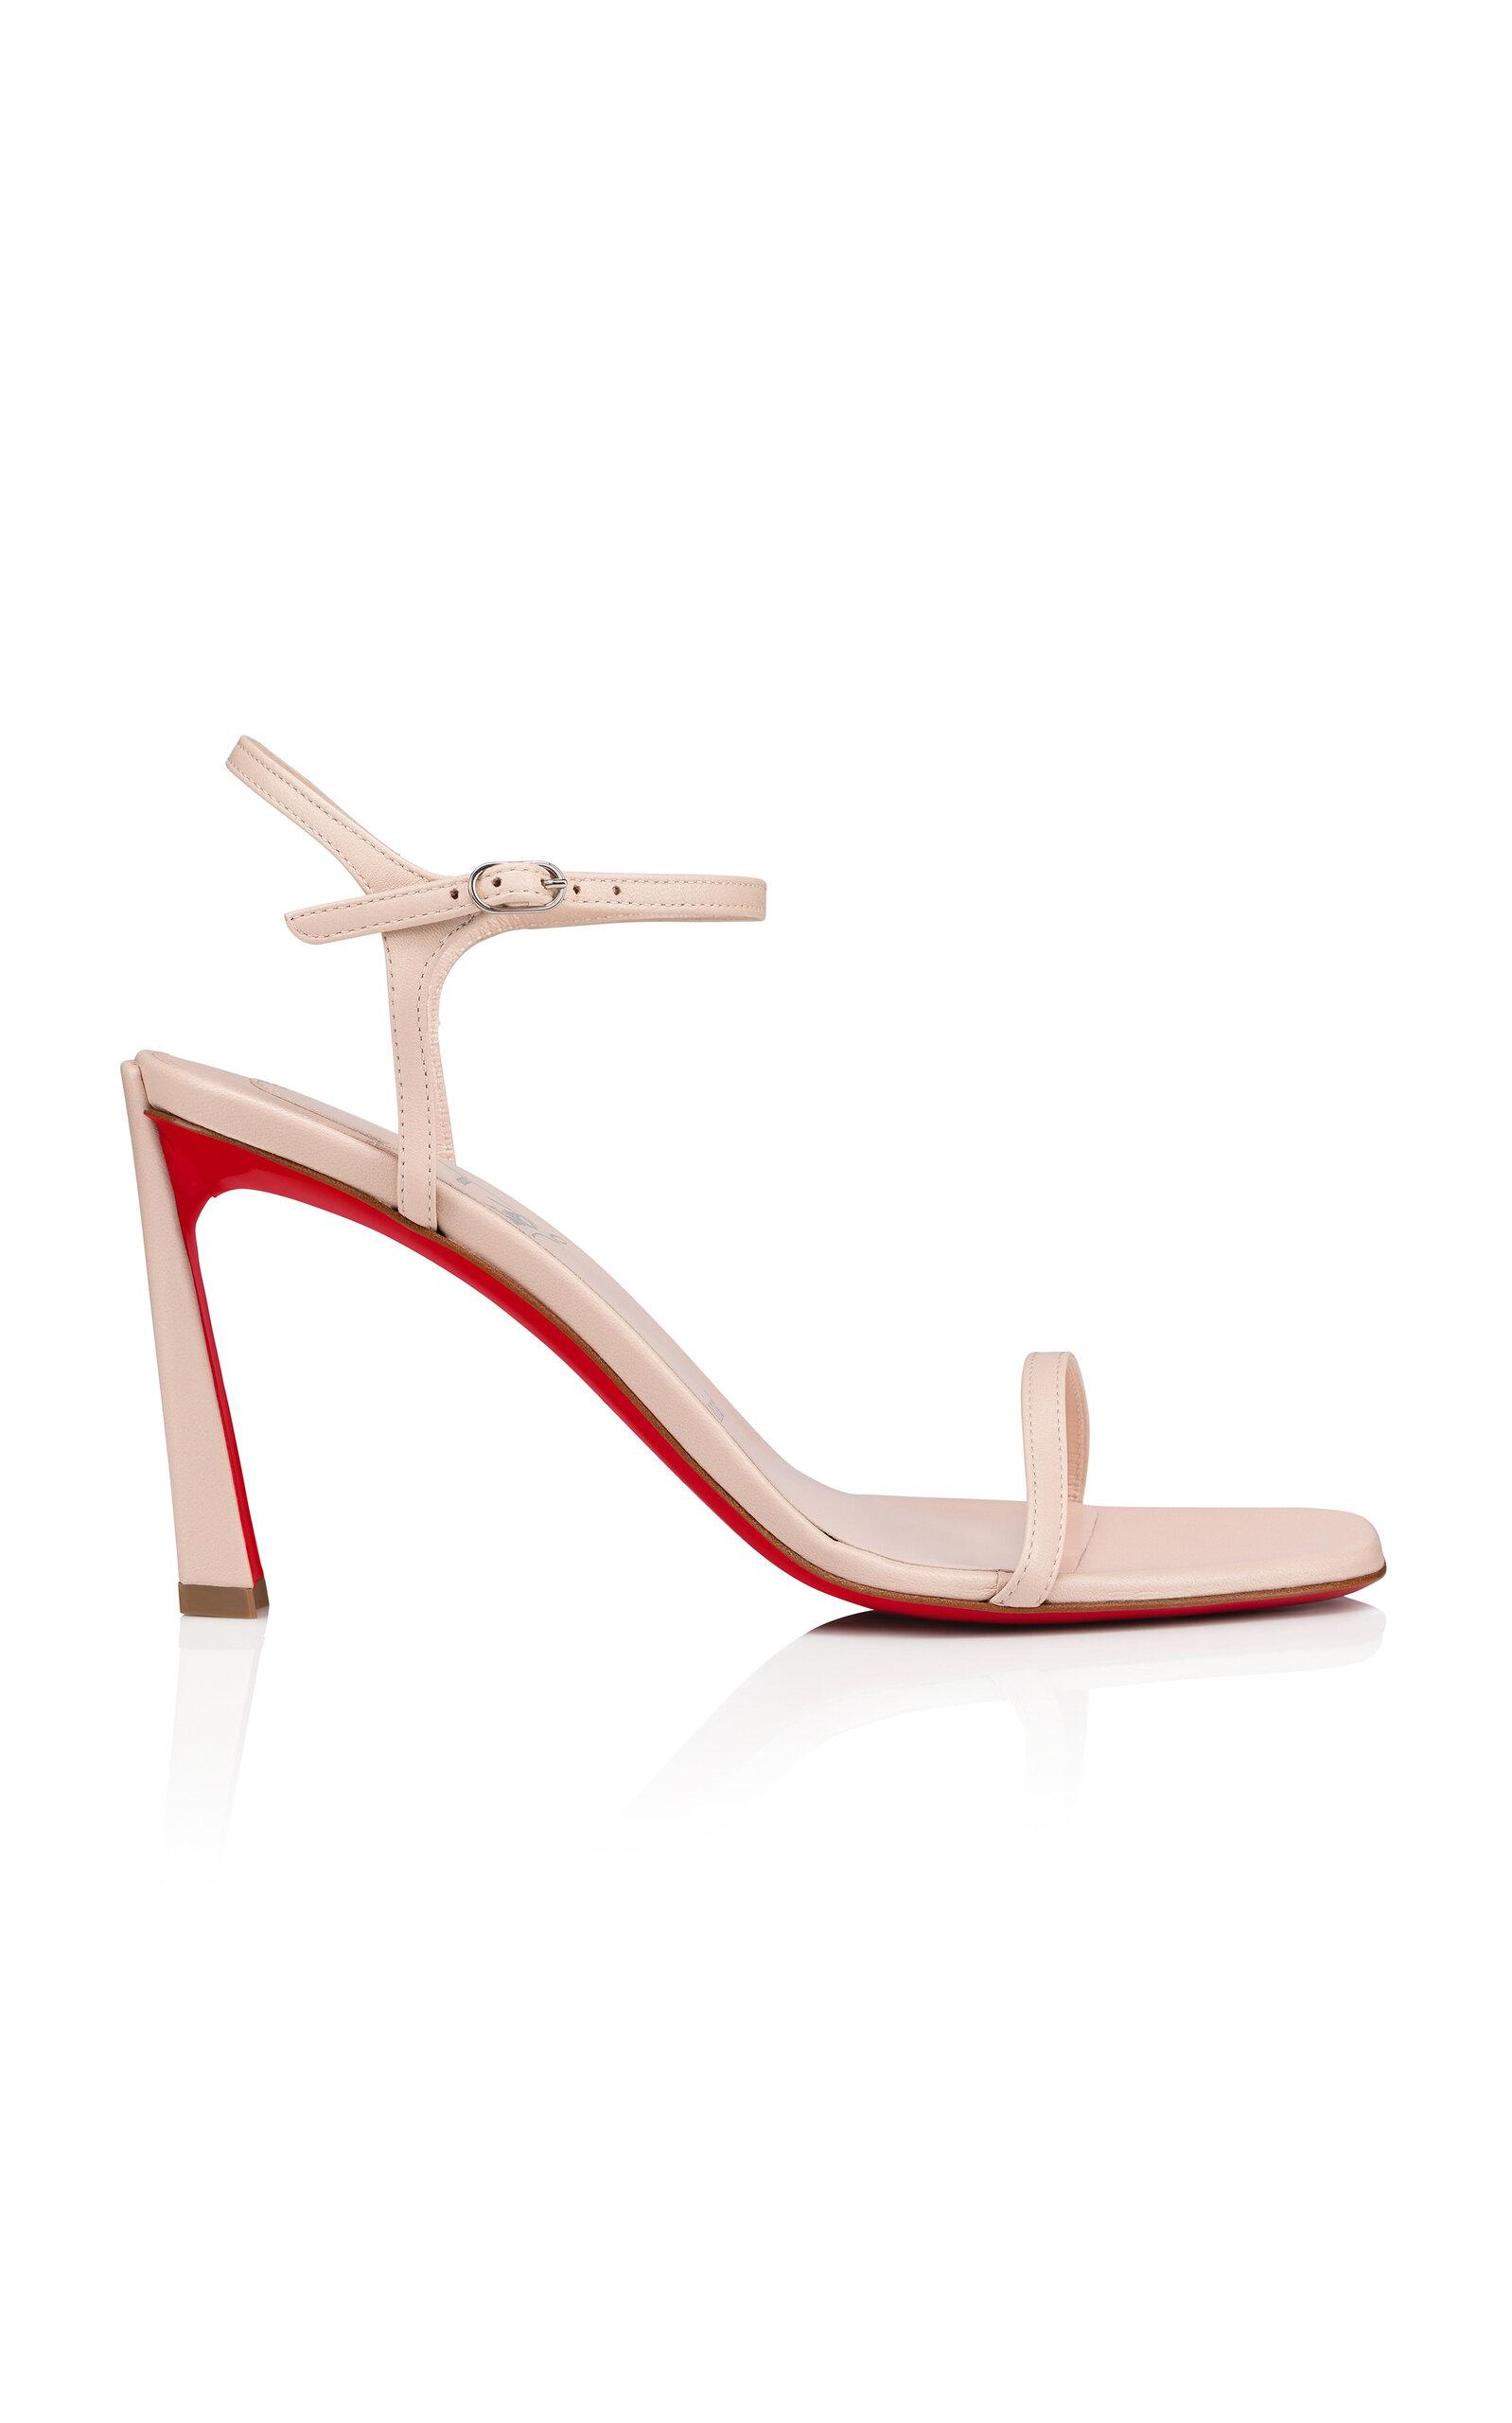 Christian Louboutin Condora 85mm Leather Sandals in Pink | Lyst